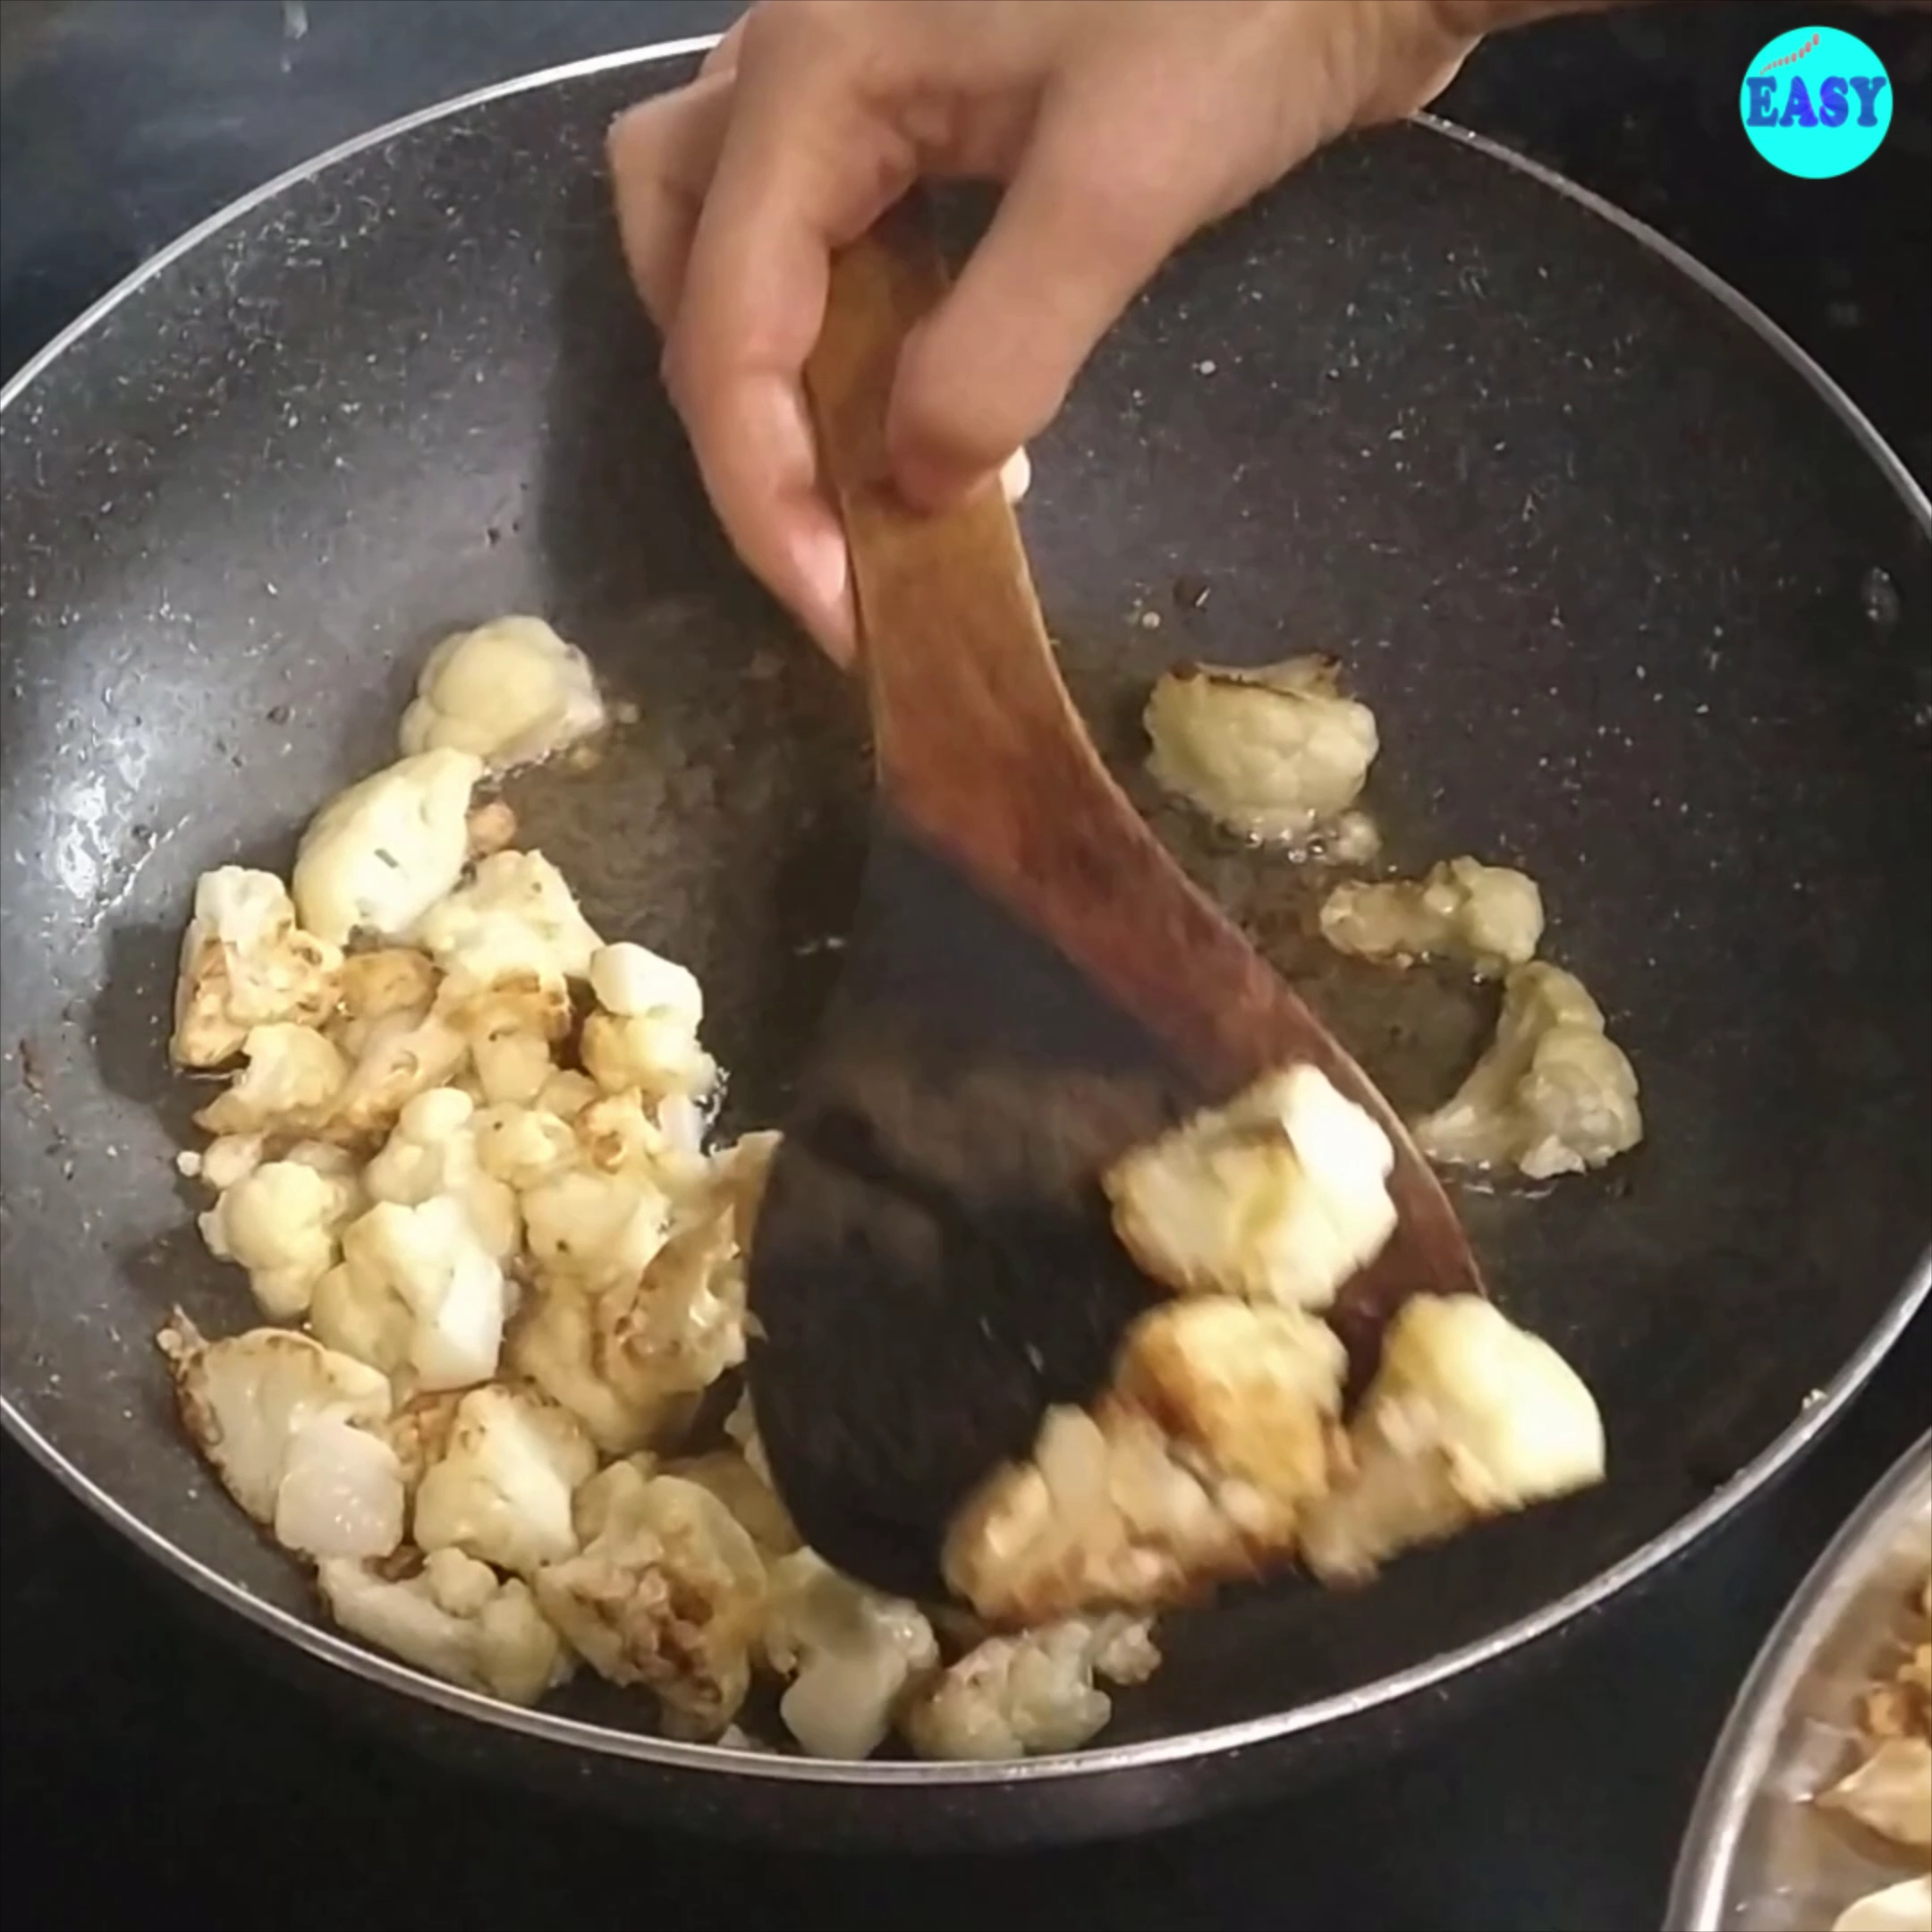 Step 1 - Heat oil in a pan or kadhai. Deep fry or shallow fry the cauliflower until light golden in colour. Drain and keep aside.